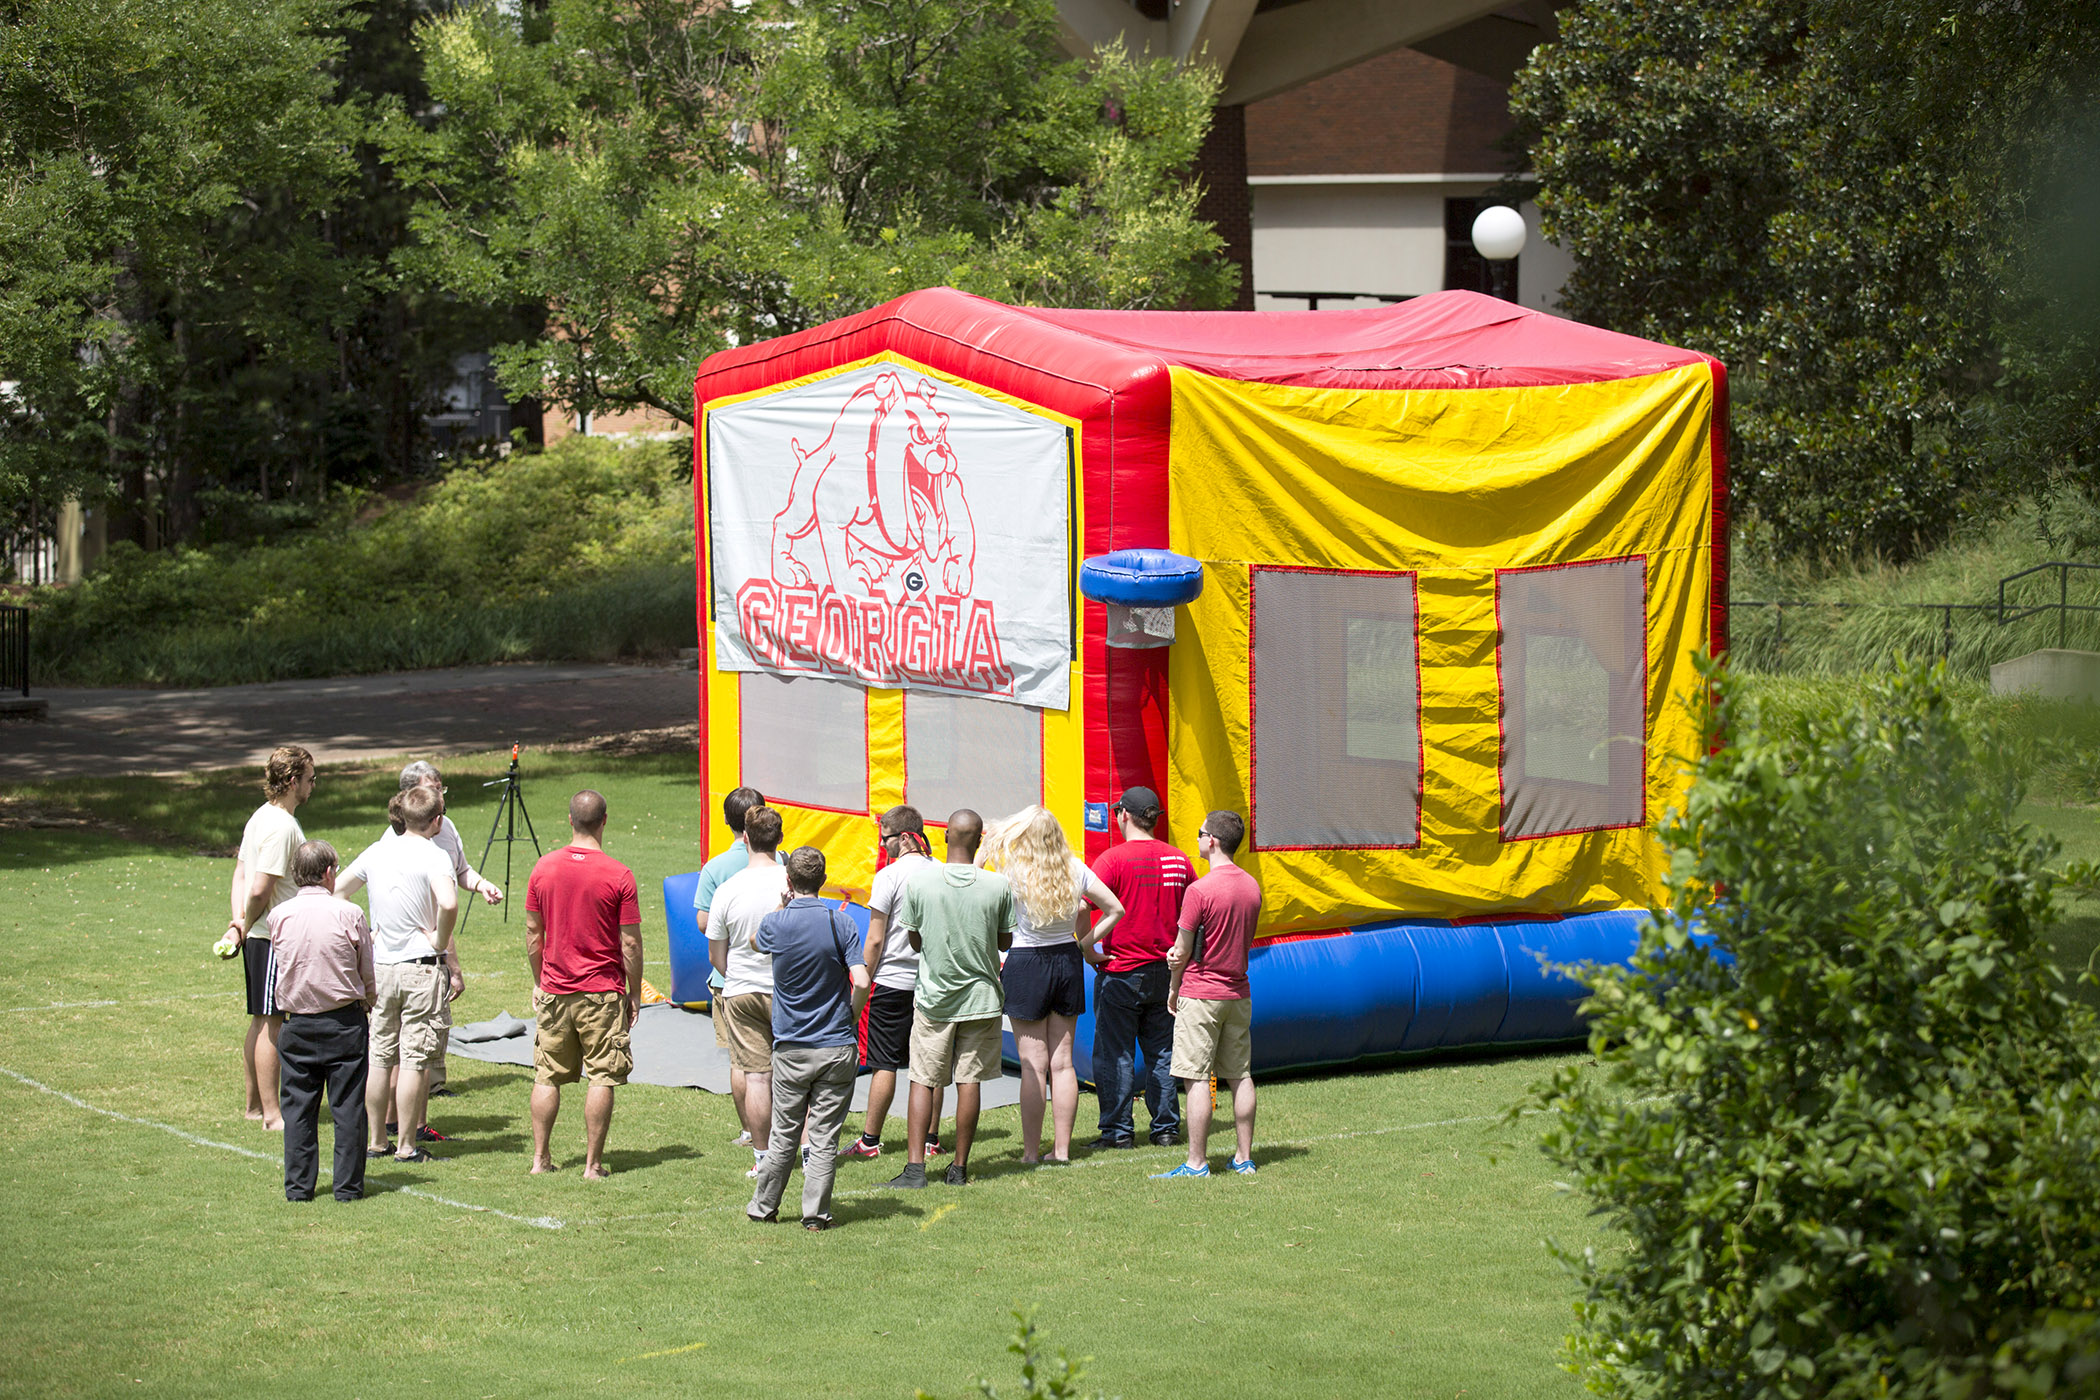 Researchers stand next to an inflatable bounce house